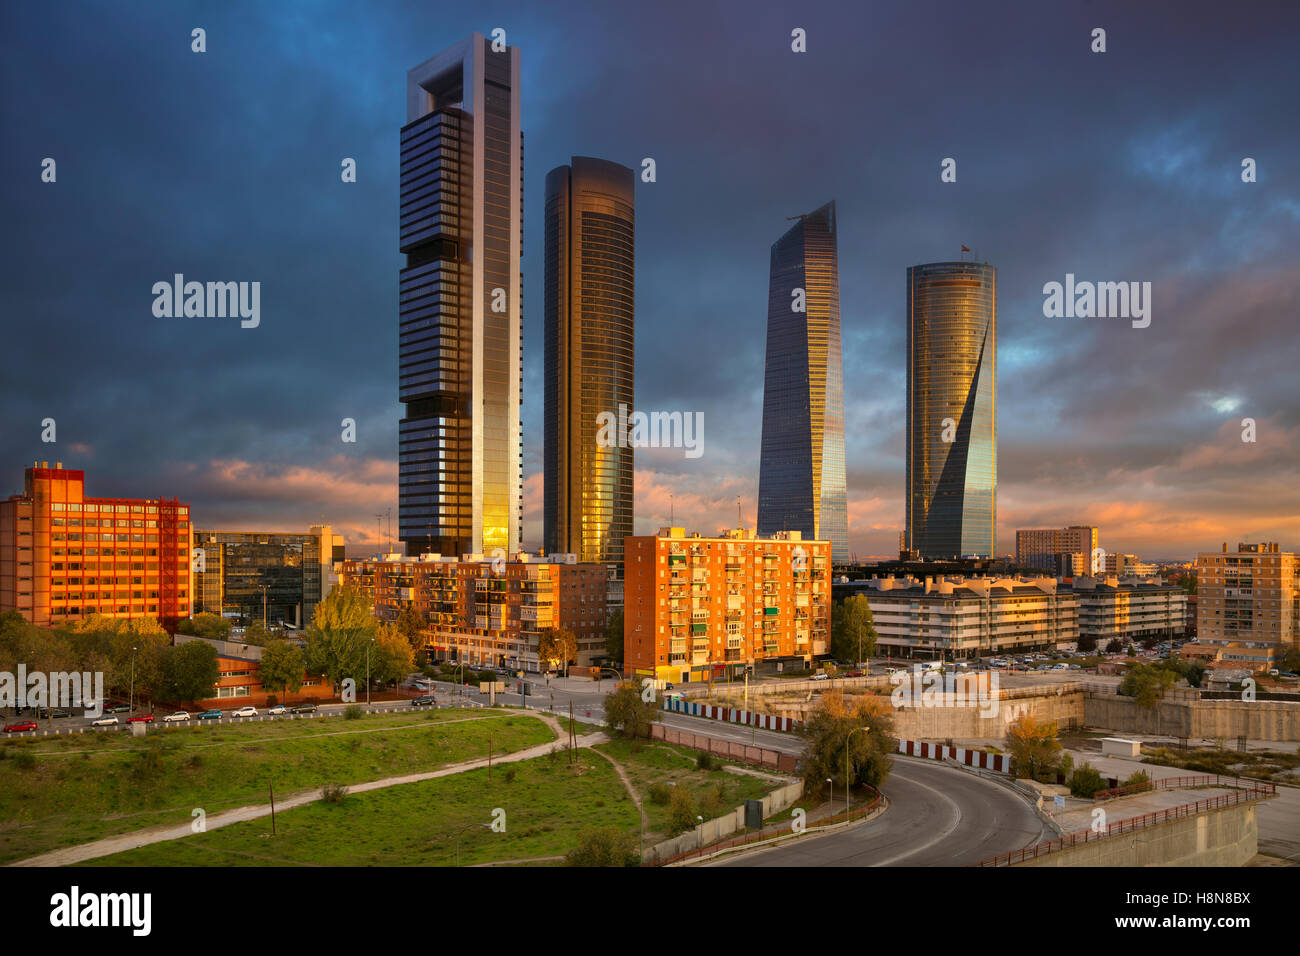 Madrid. Image of Madrid, Spain financial district with modern skyscrapers during sunrise. Stock Photo